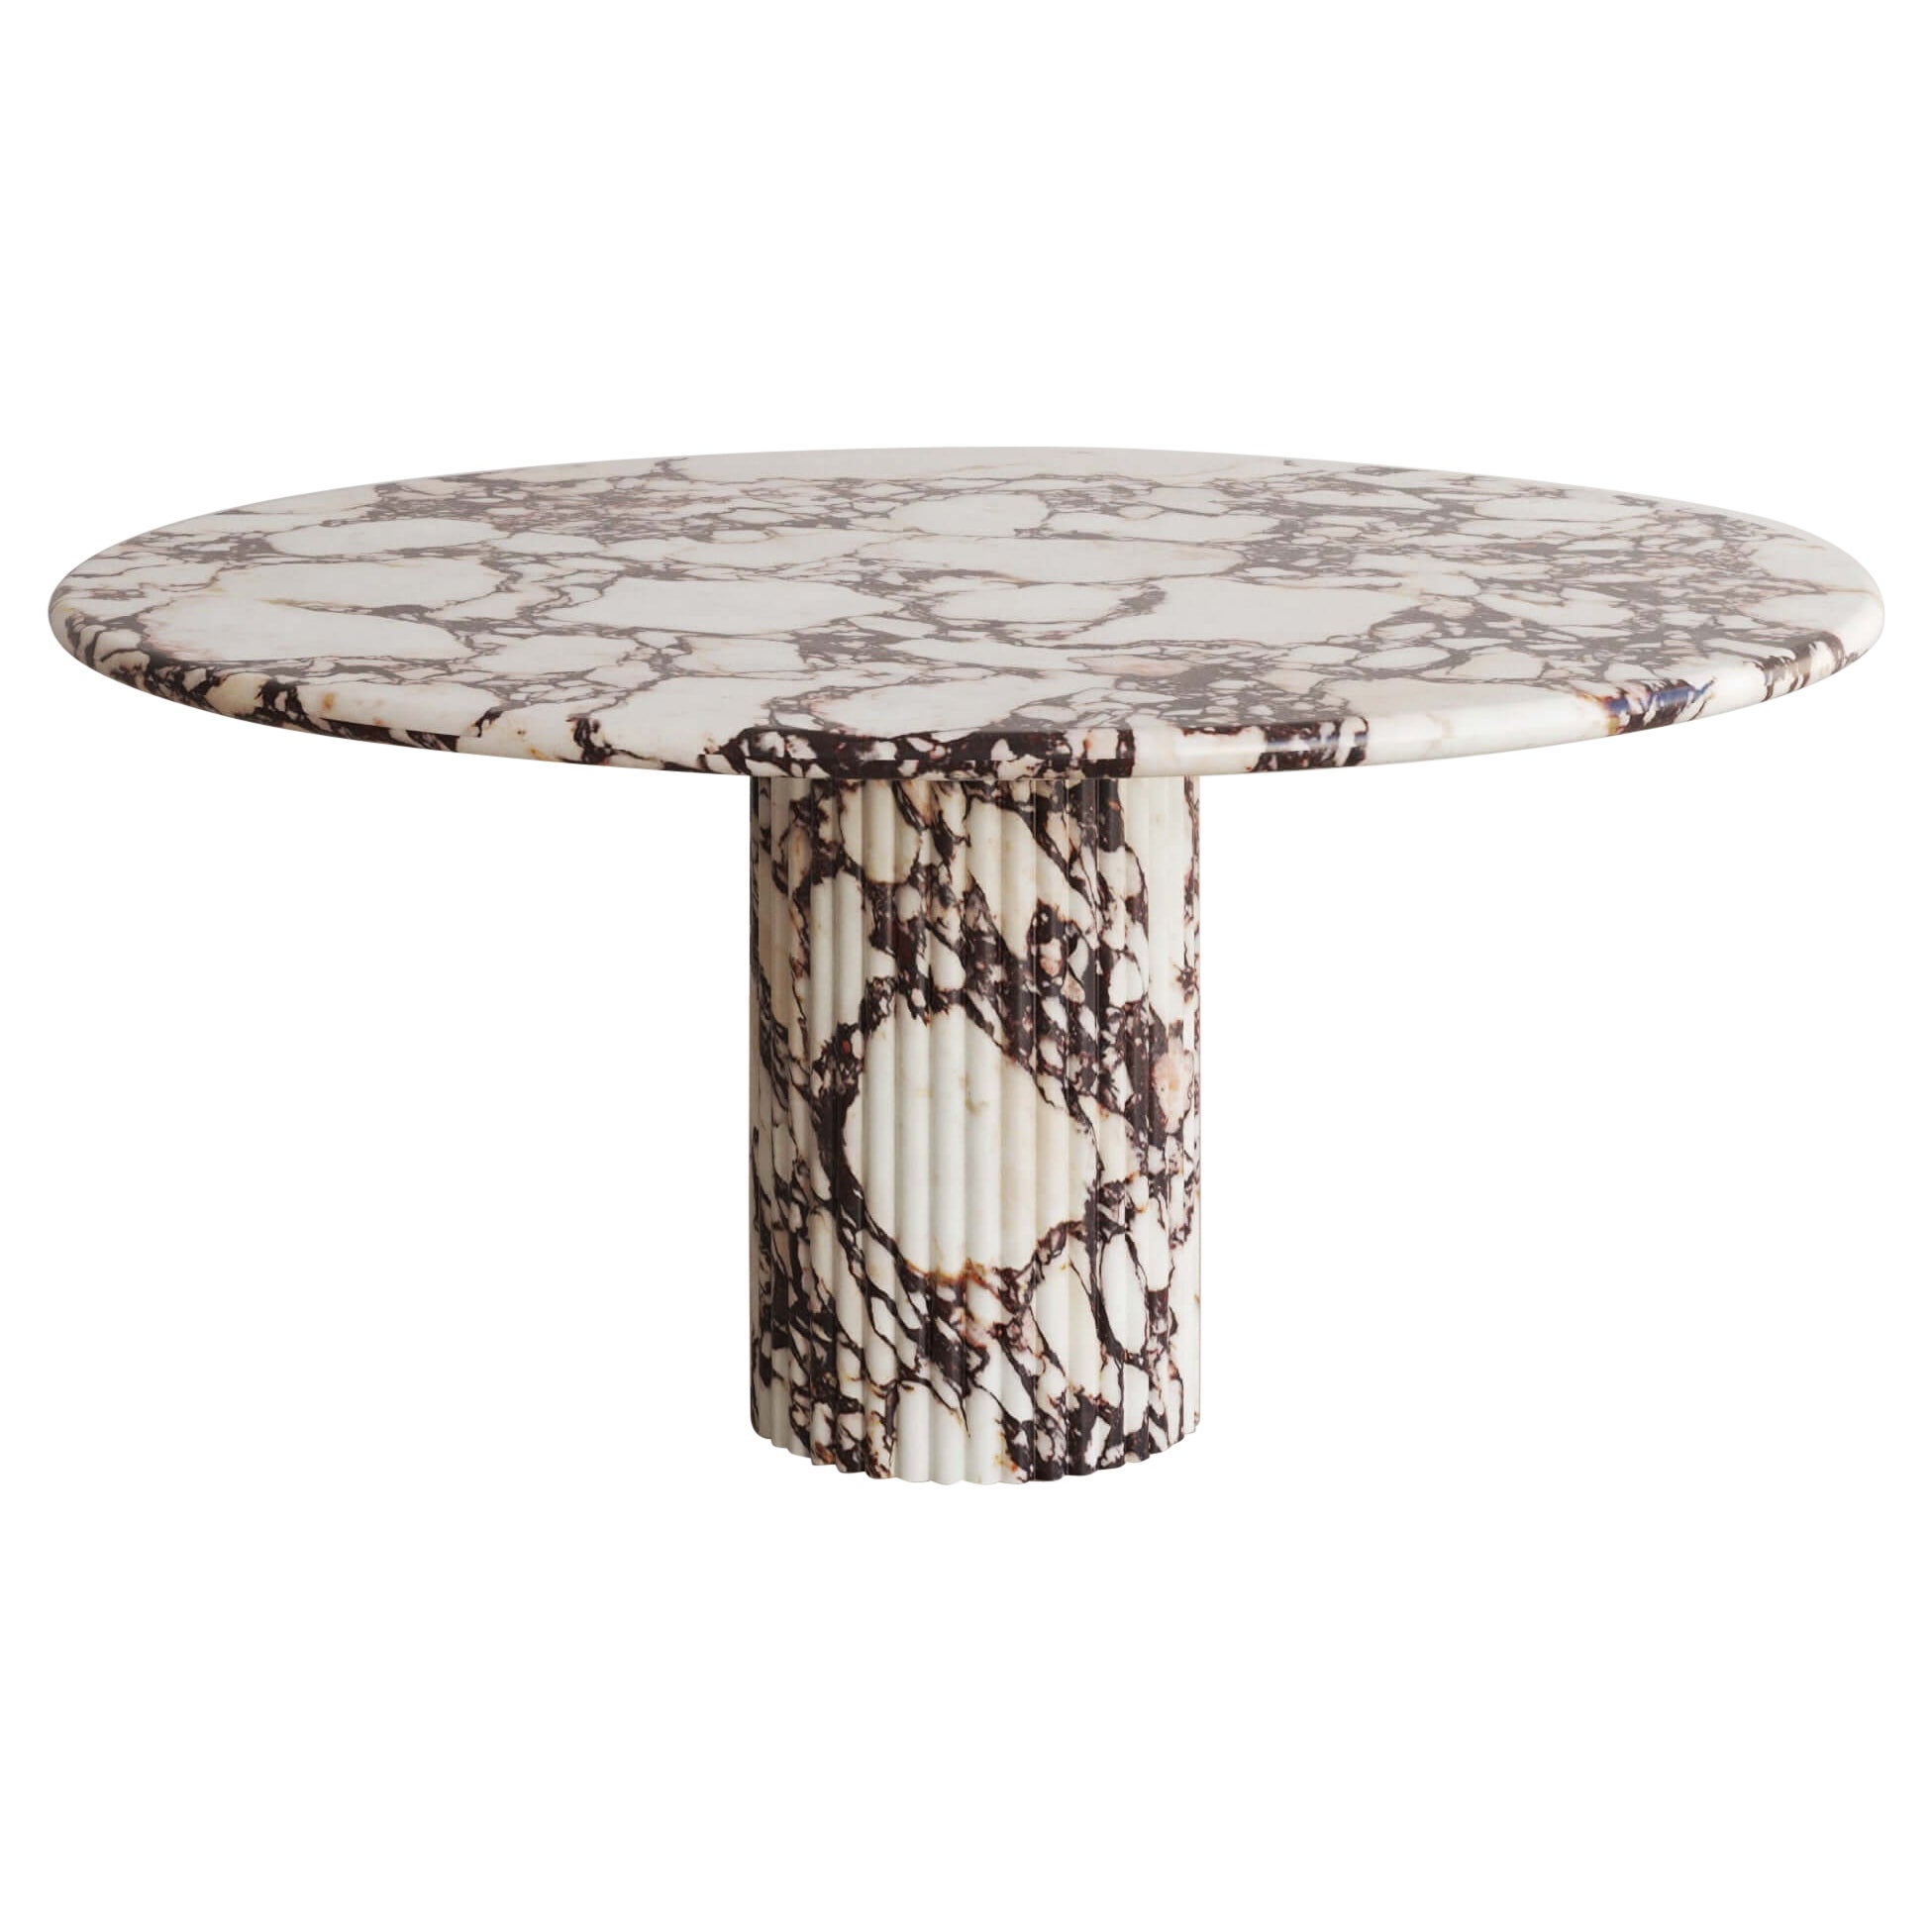 Viola Antica Dining Table I by the Essentialist For Sale